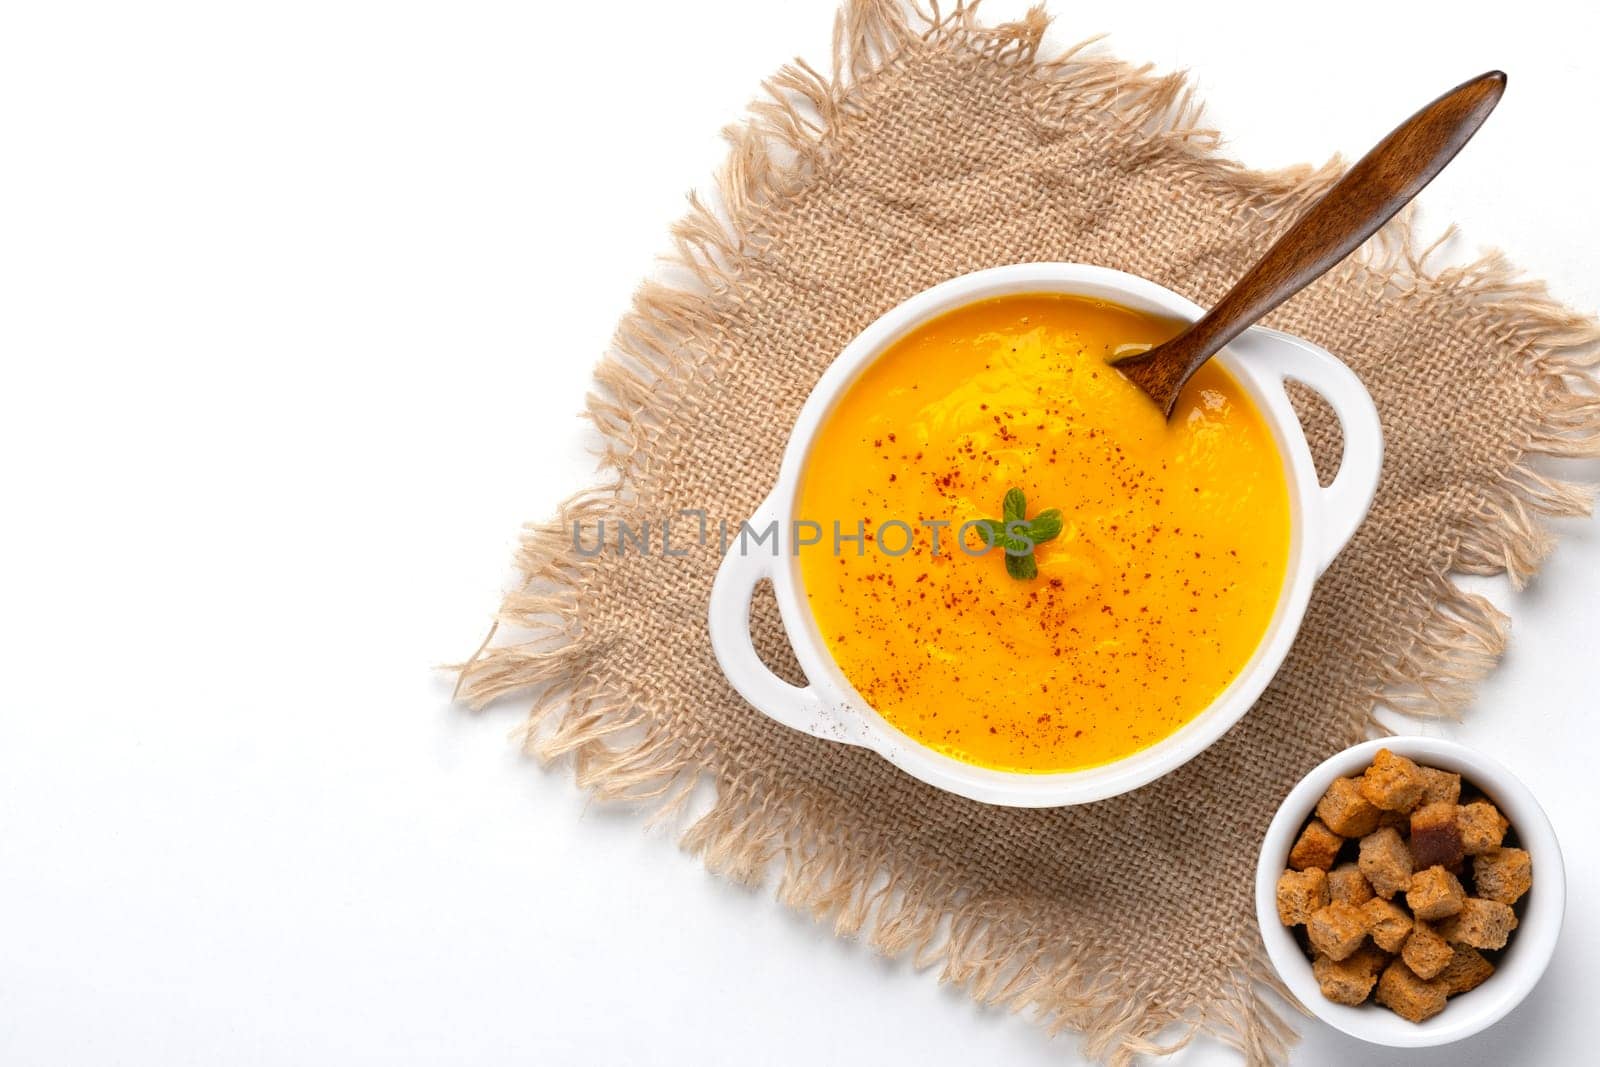 Pumpkin soup with croutons on white background, with copy space for text.